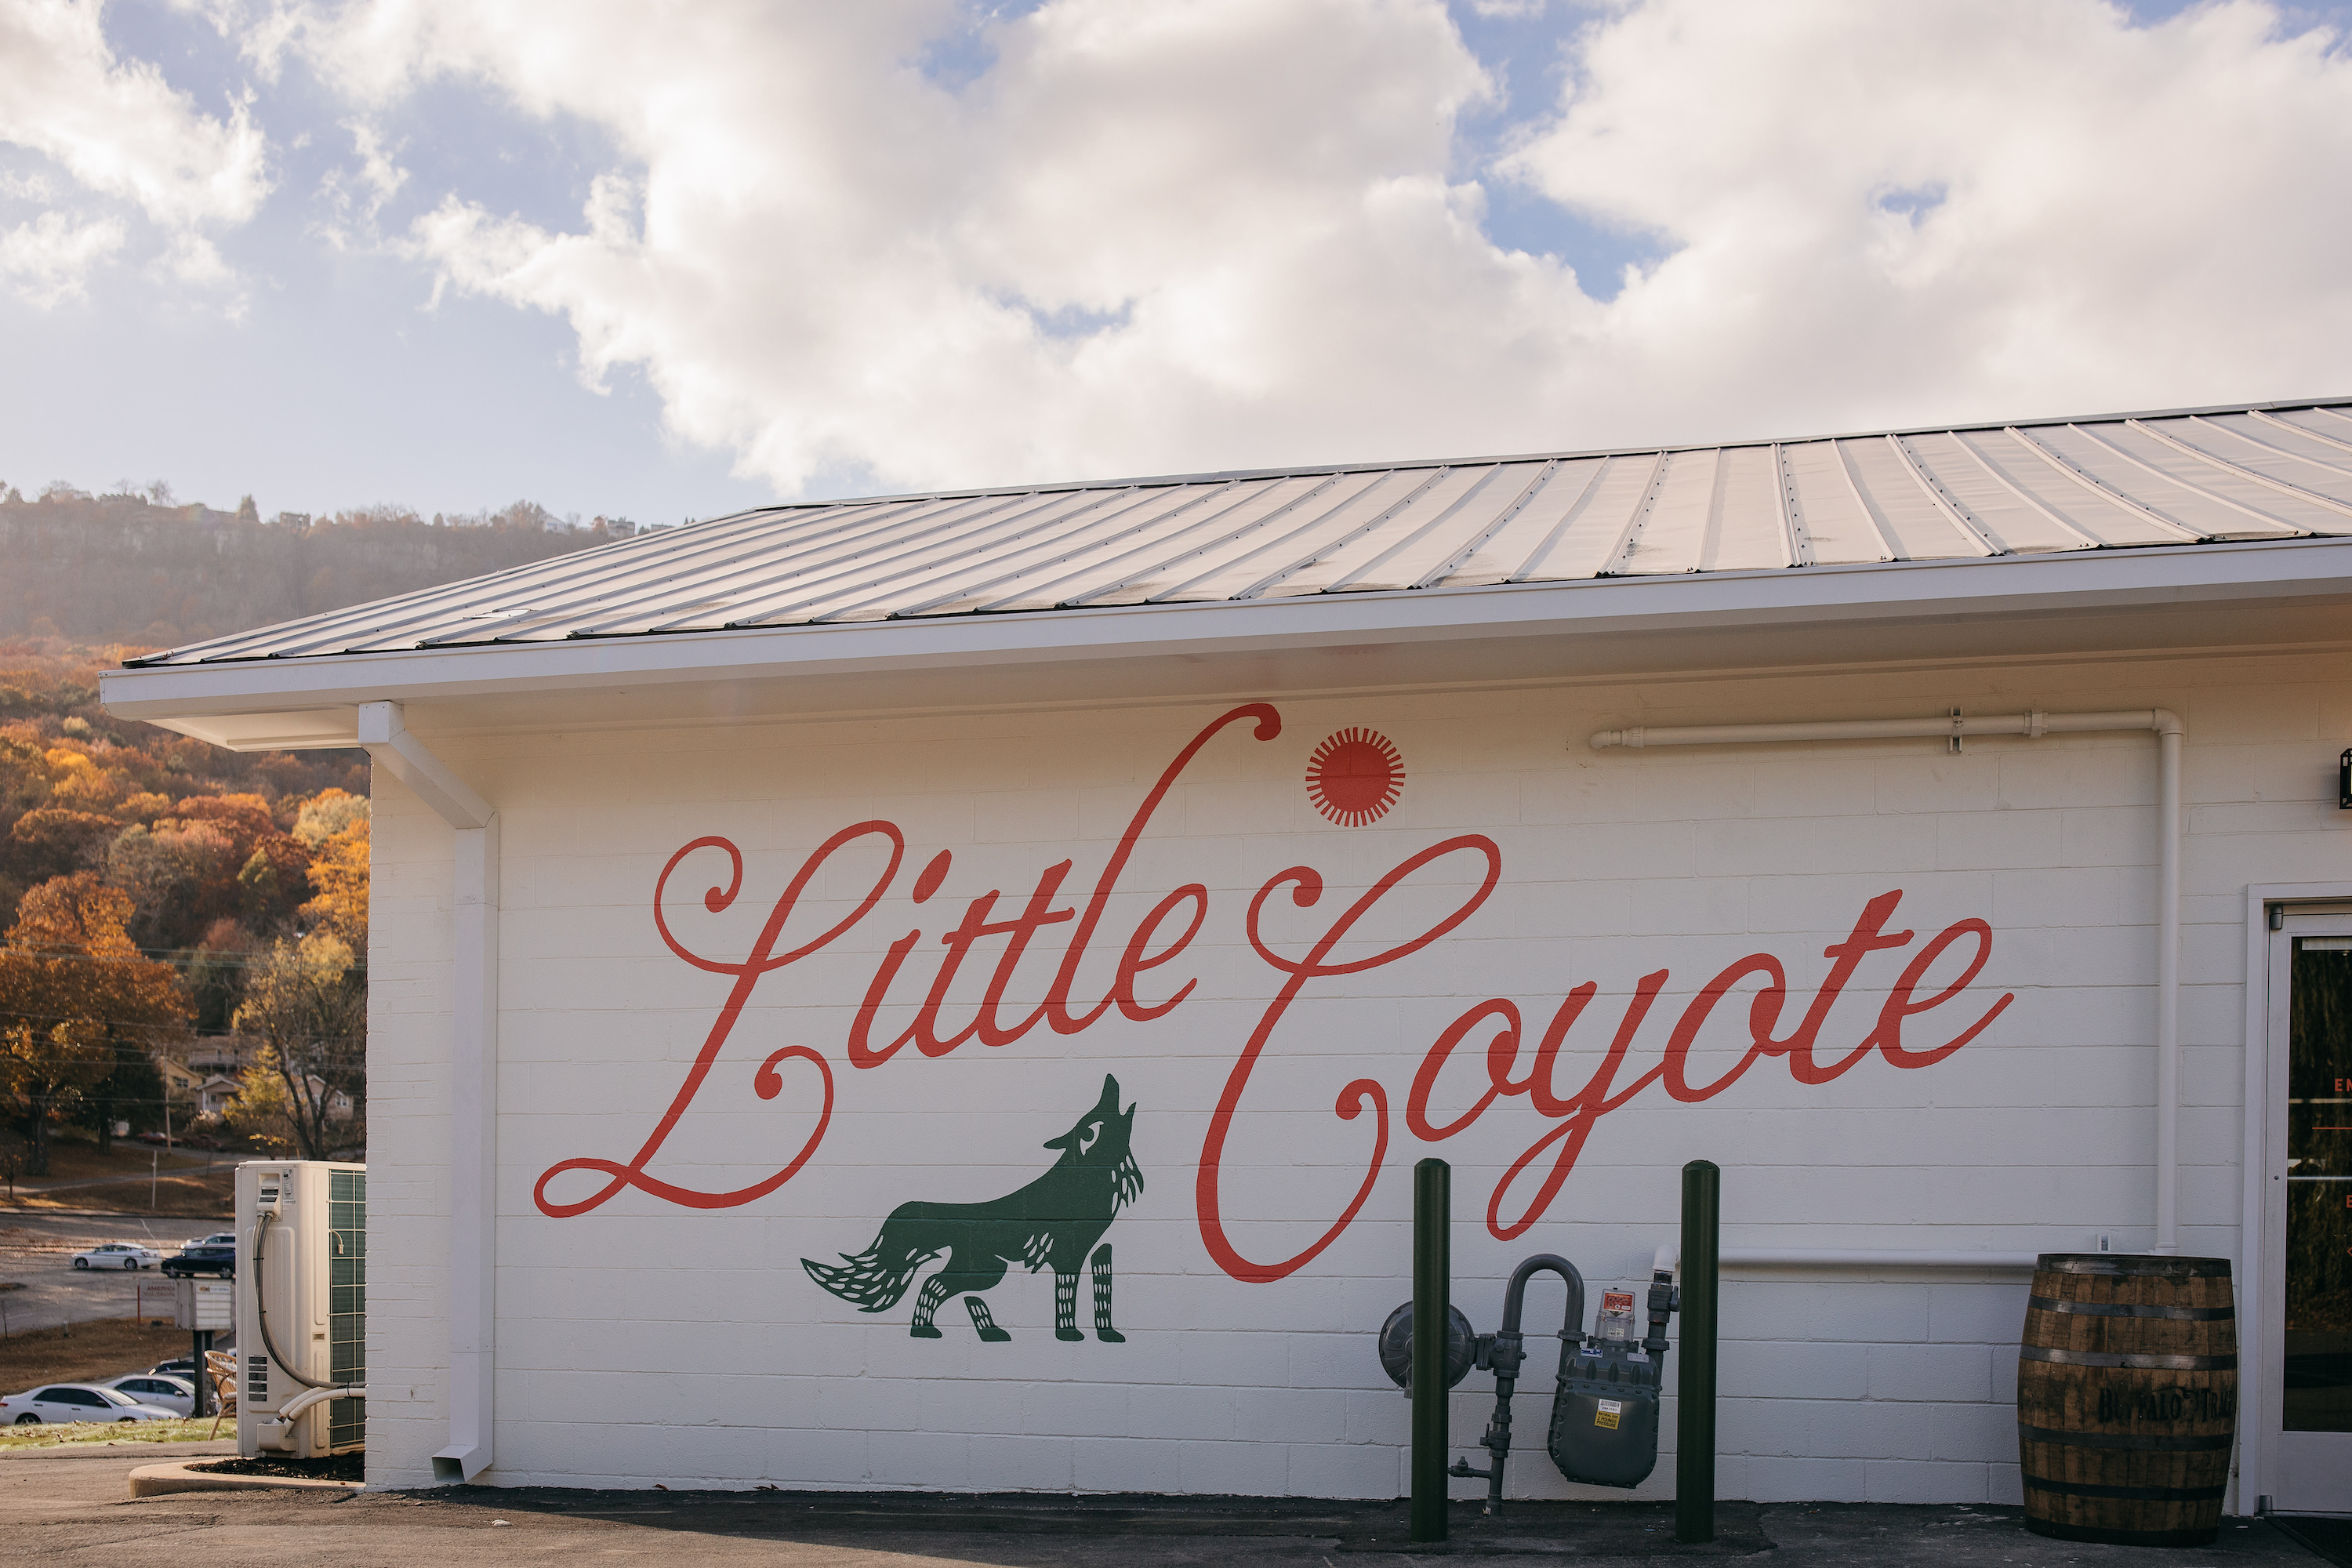 The exterior wall of a restaurant; it has "Little Coyote" painted in large red cursive letters, and a red sun and green coyote are on the wall.